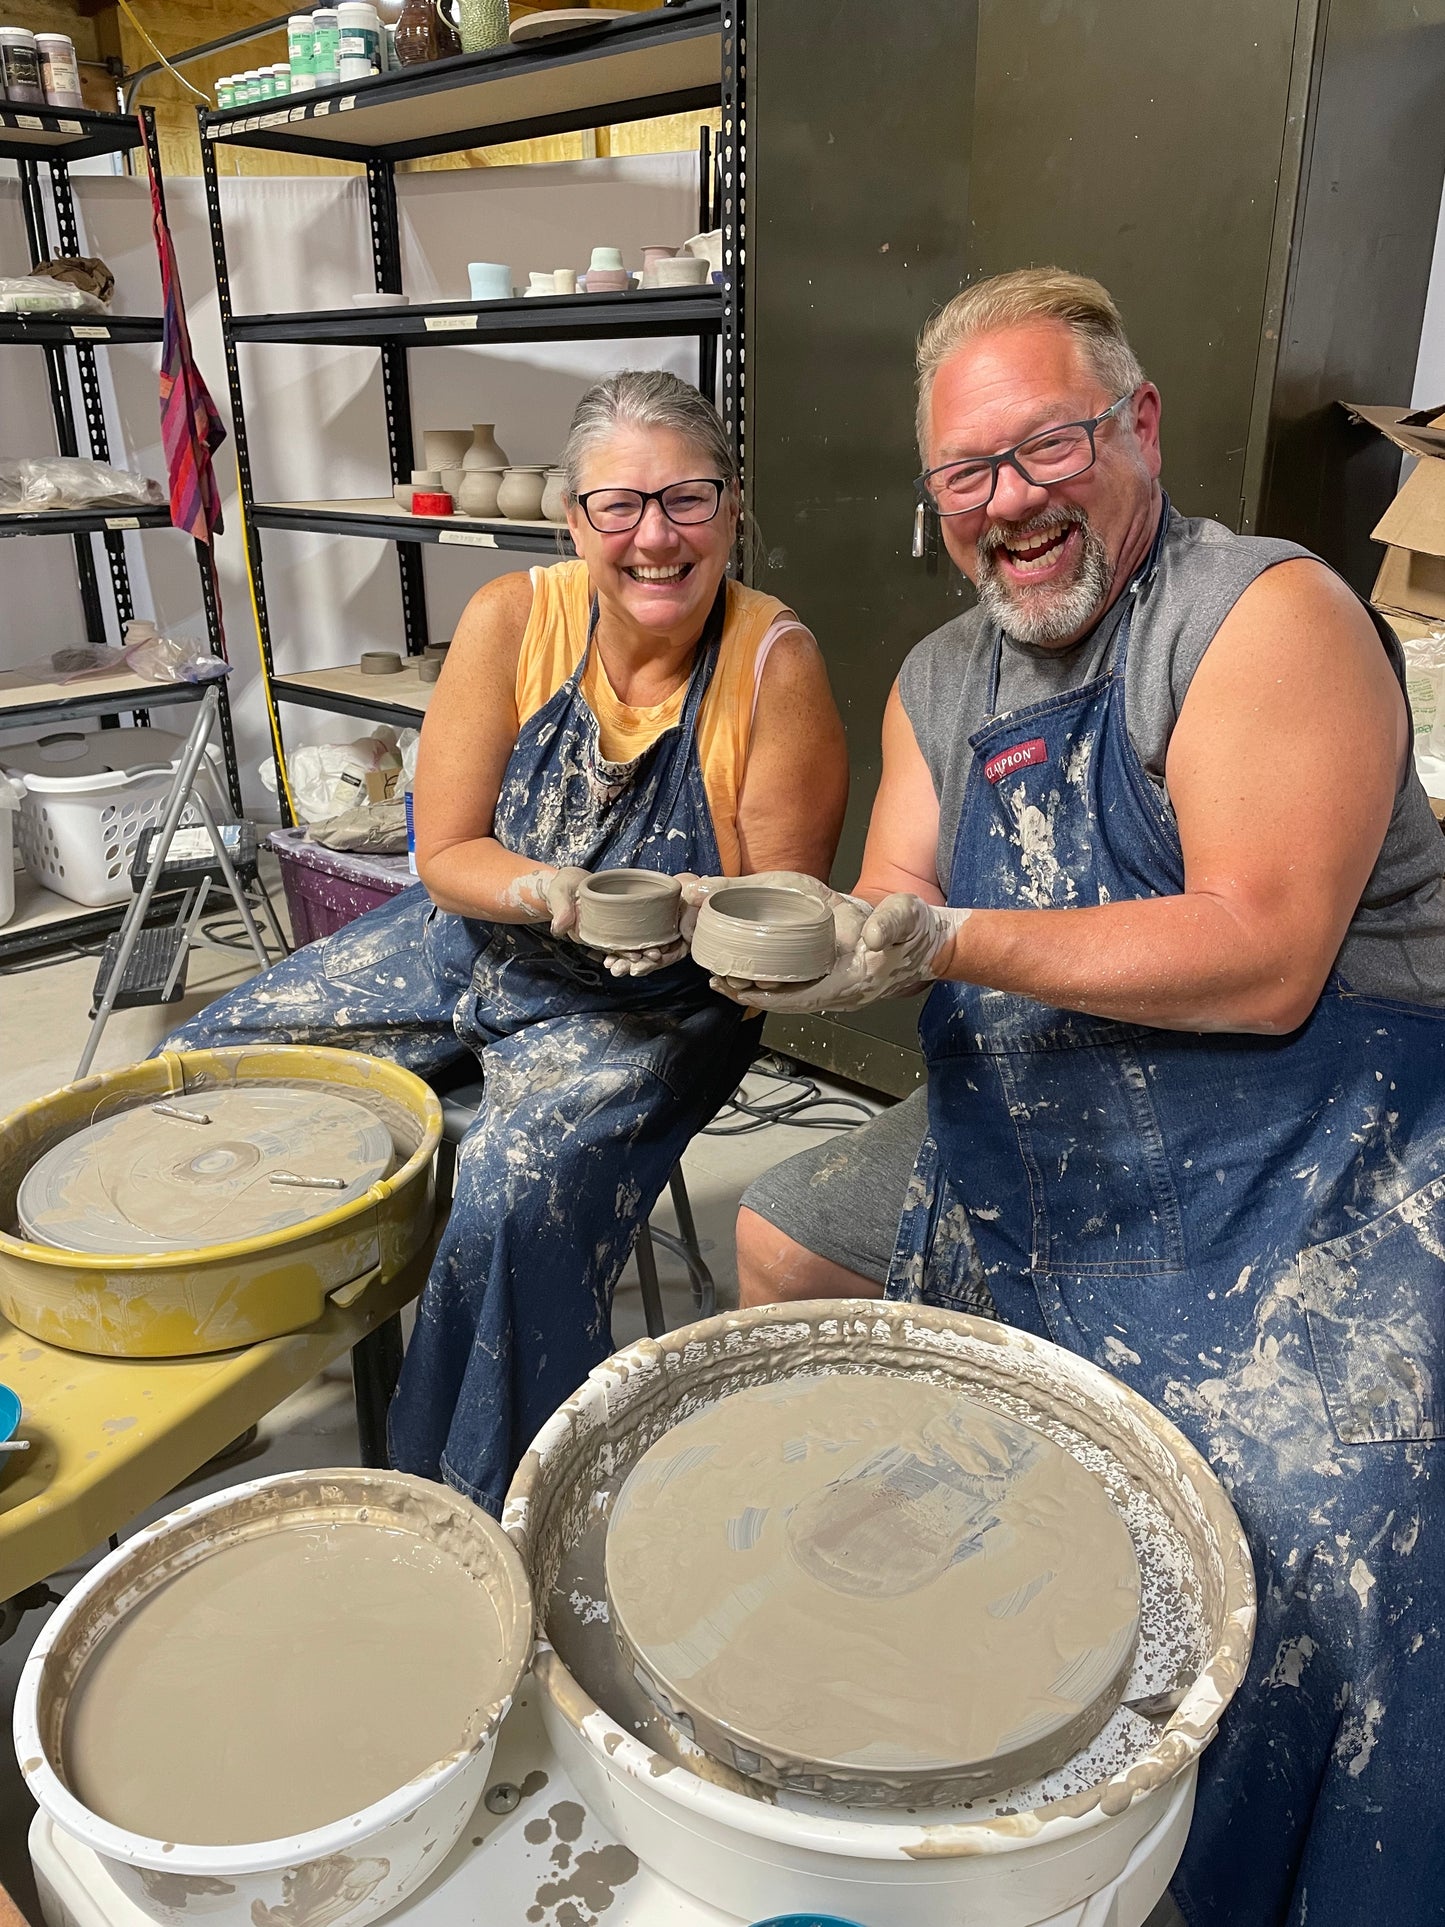 Date Night on the Pottery Wheel